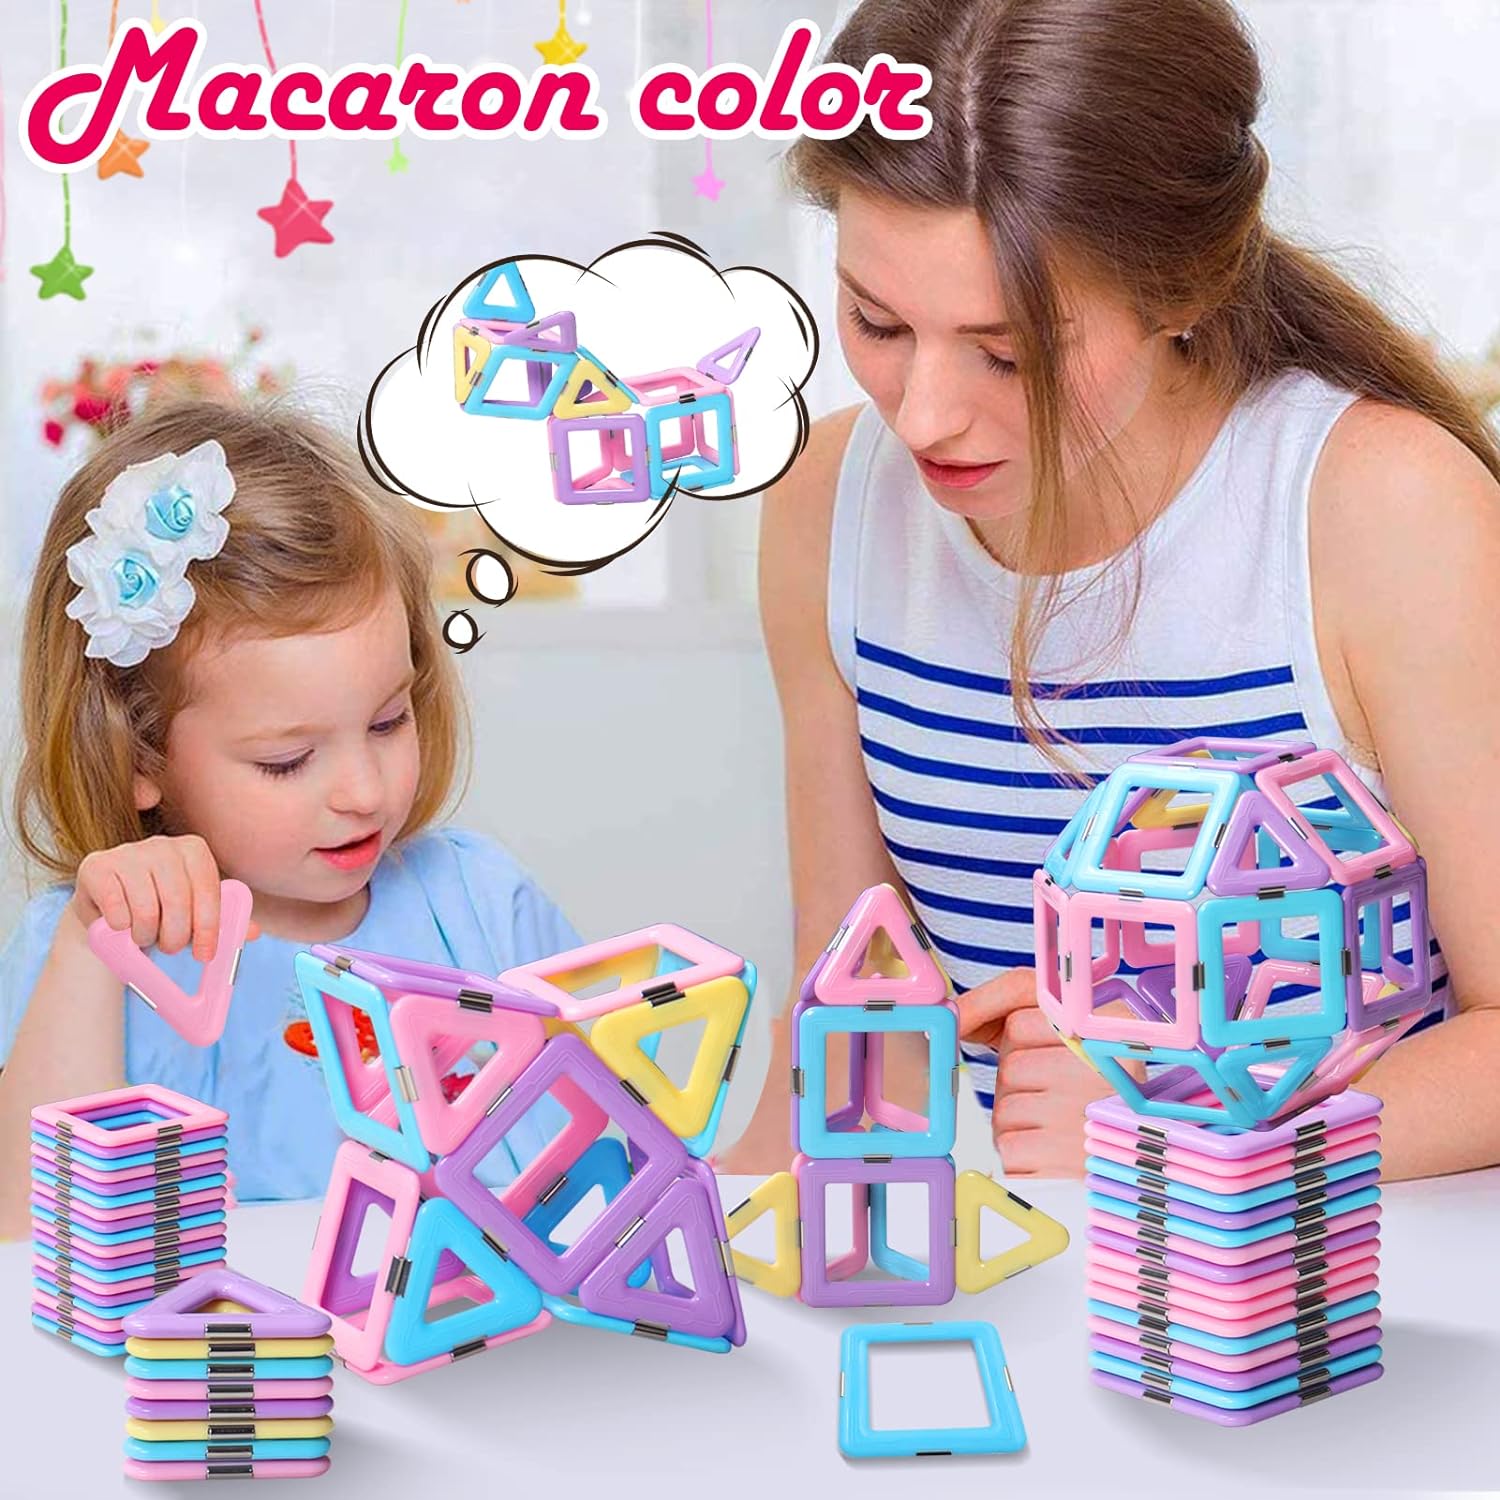 Magnetic Tiles Toys for 3 4 5 6 7 8+ Year Old Boys Girls Upgrade Macaron Castle Blocks Building Set for Toddlers STEM Creativity/Educational Toys for Kids Age 3-6 Christmas Birthday Gifts : Toys Games